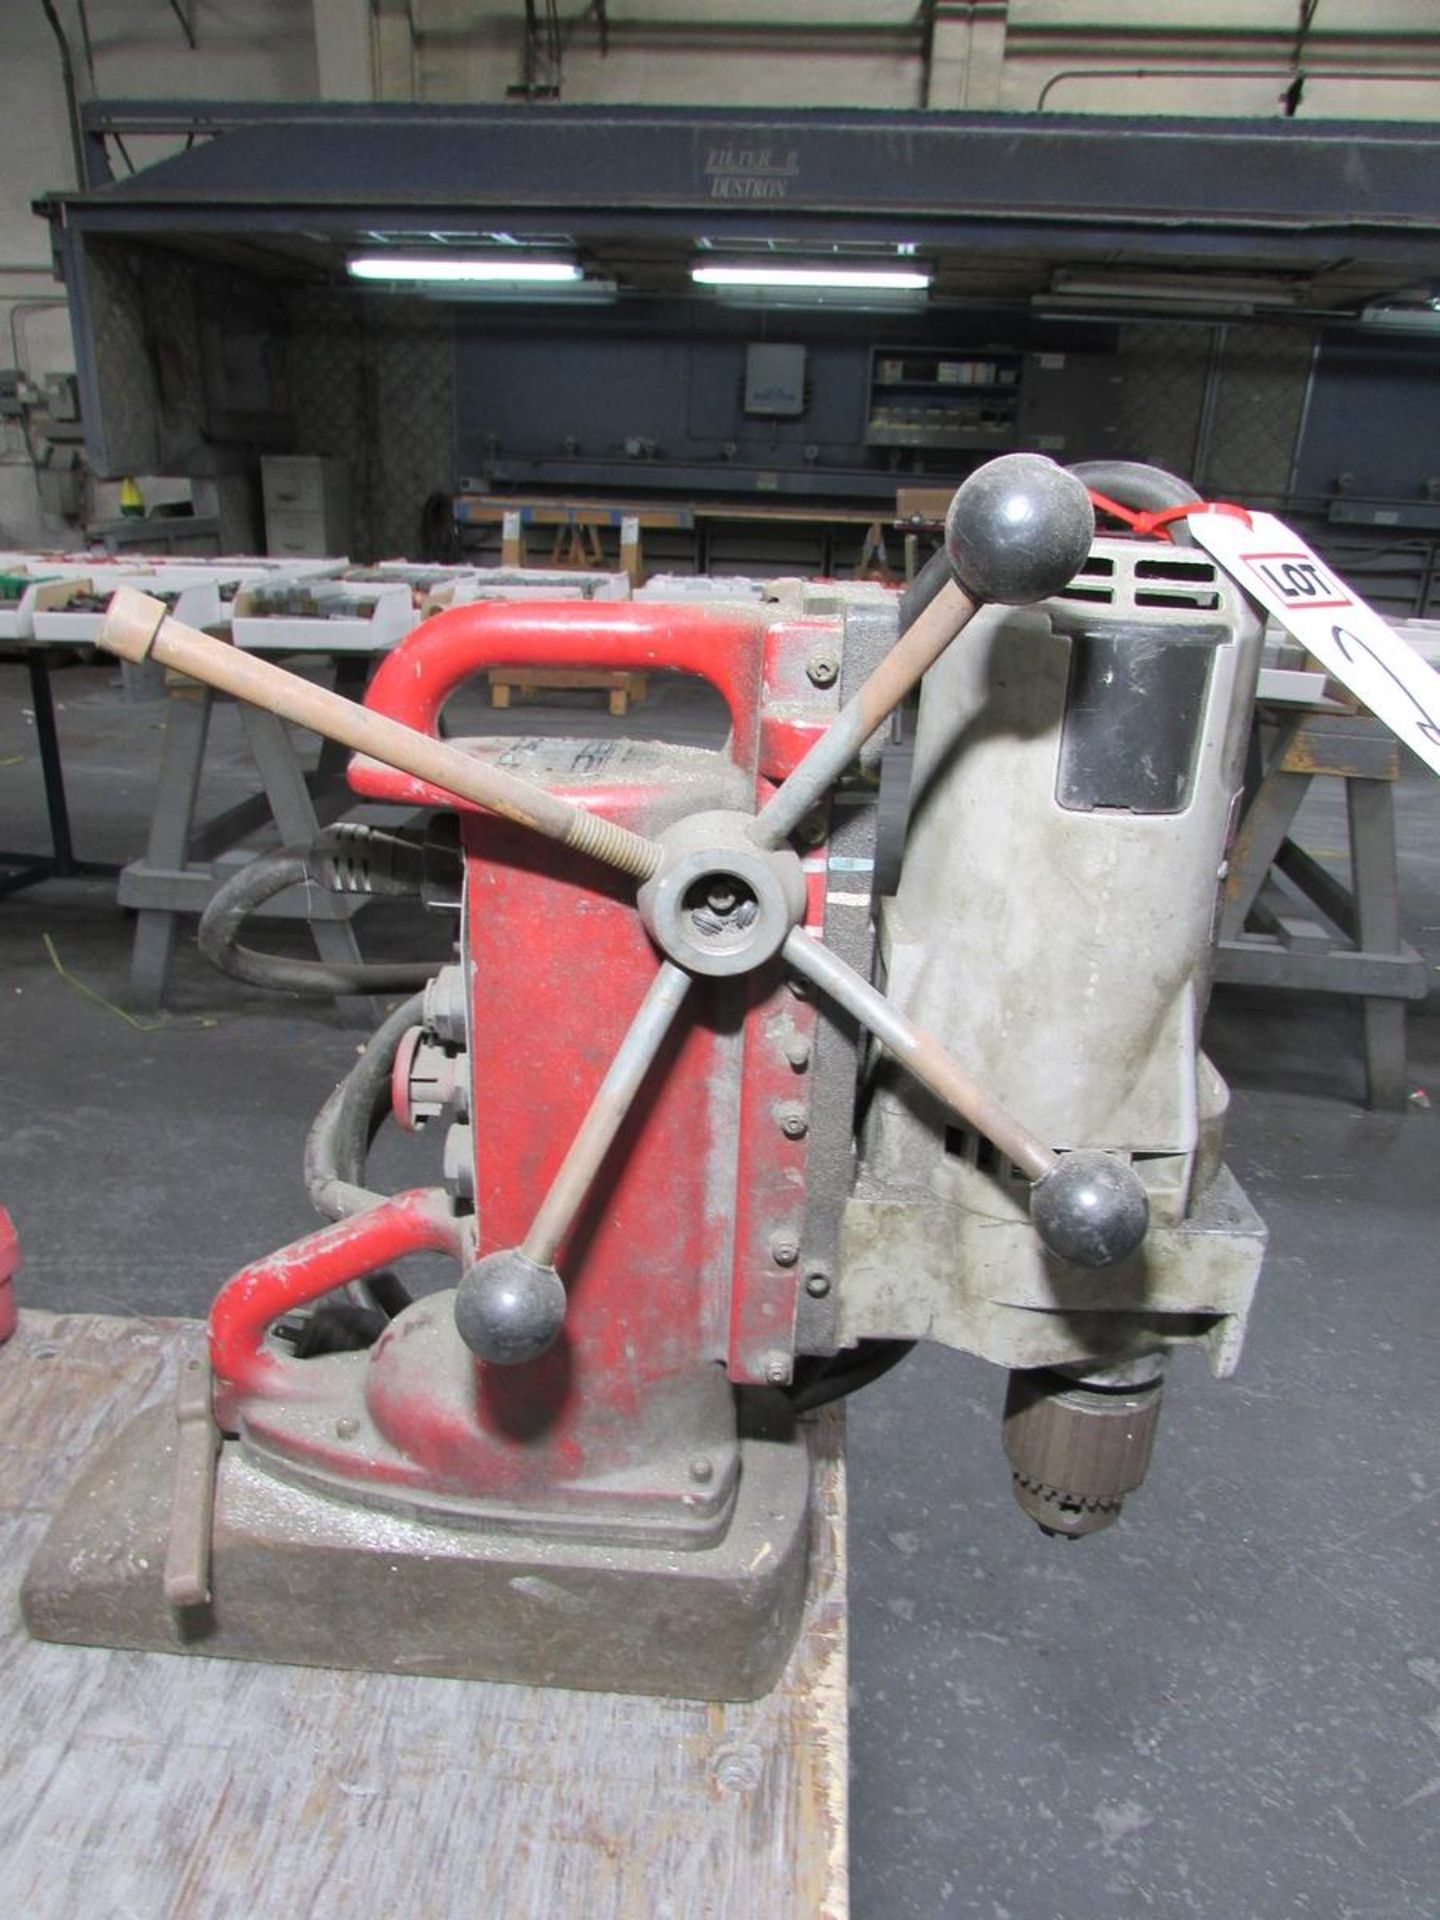 MILWAUKEE 3/4" MAGNETIC BASE DRILL PRESS, MODEL 4231, CAT. NO. 4262-1 DRILL MOTOR - Image 5 of 5